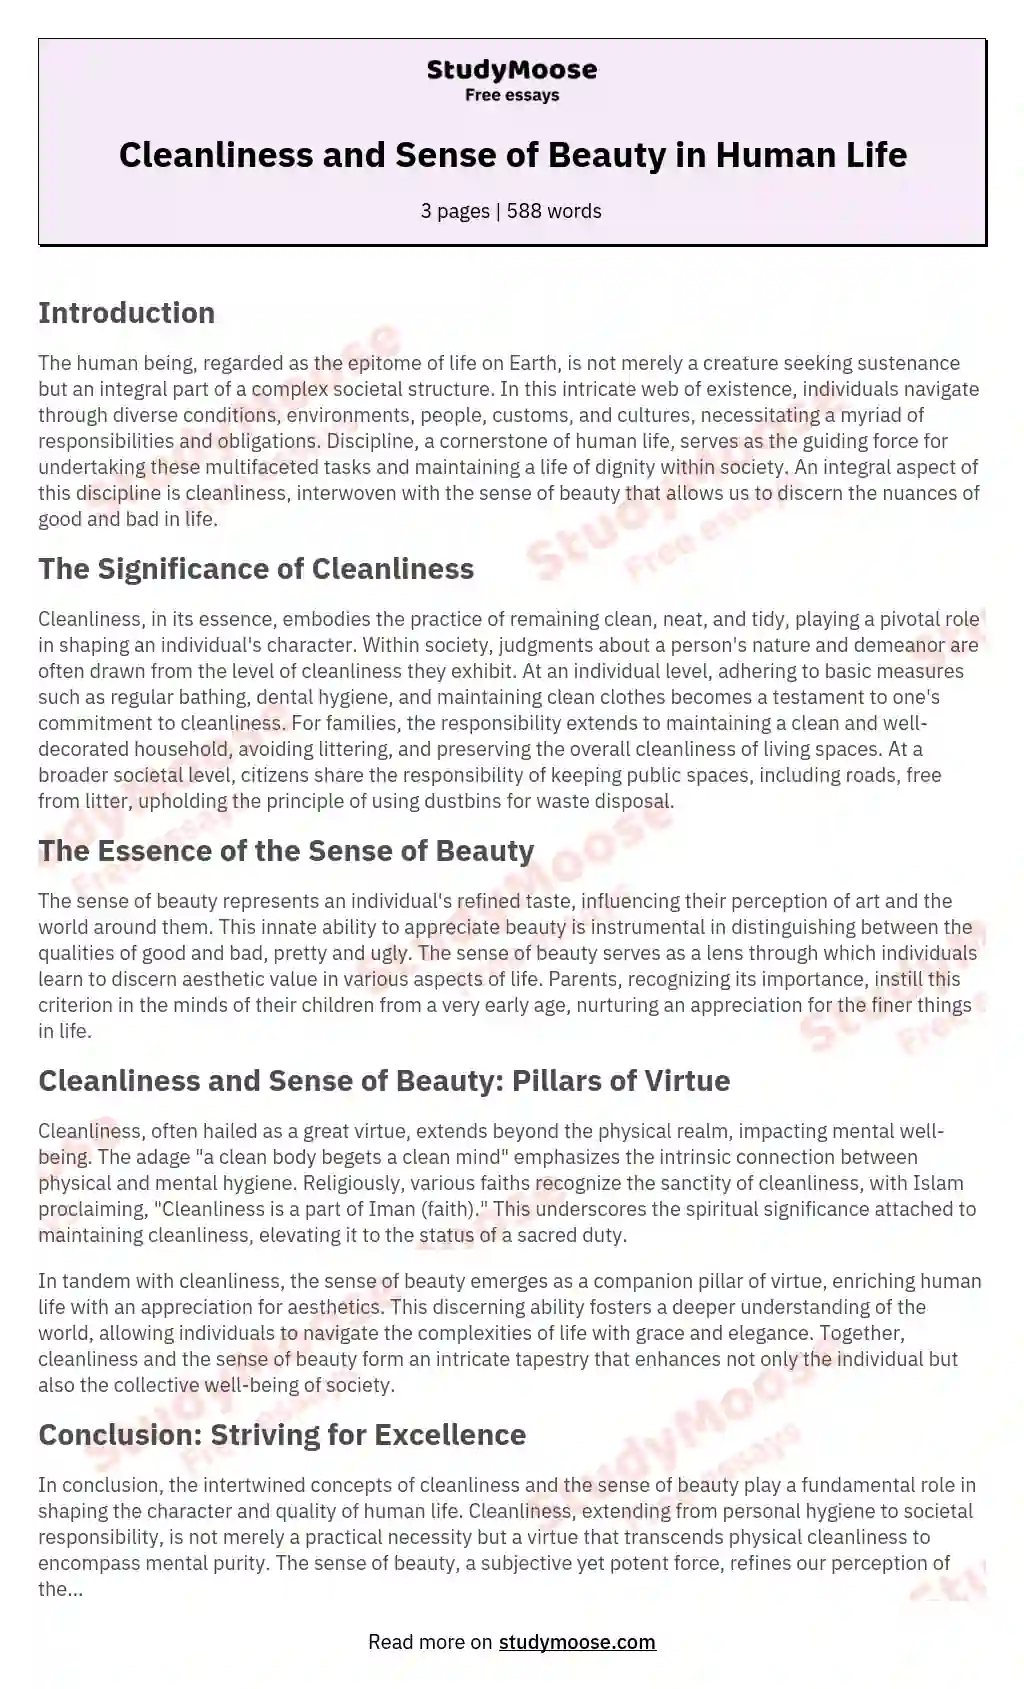 Cleanliness and Sense of Beauty in Human Life essay